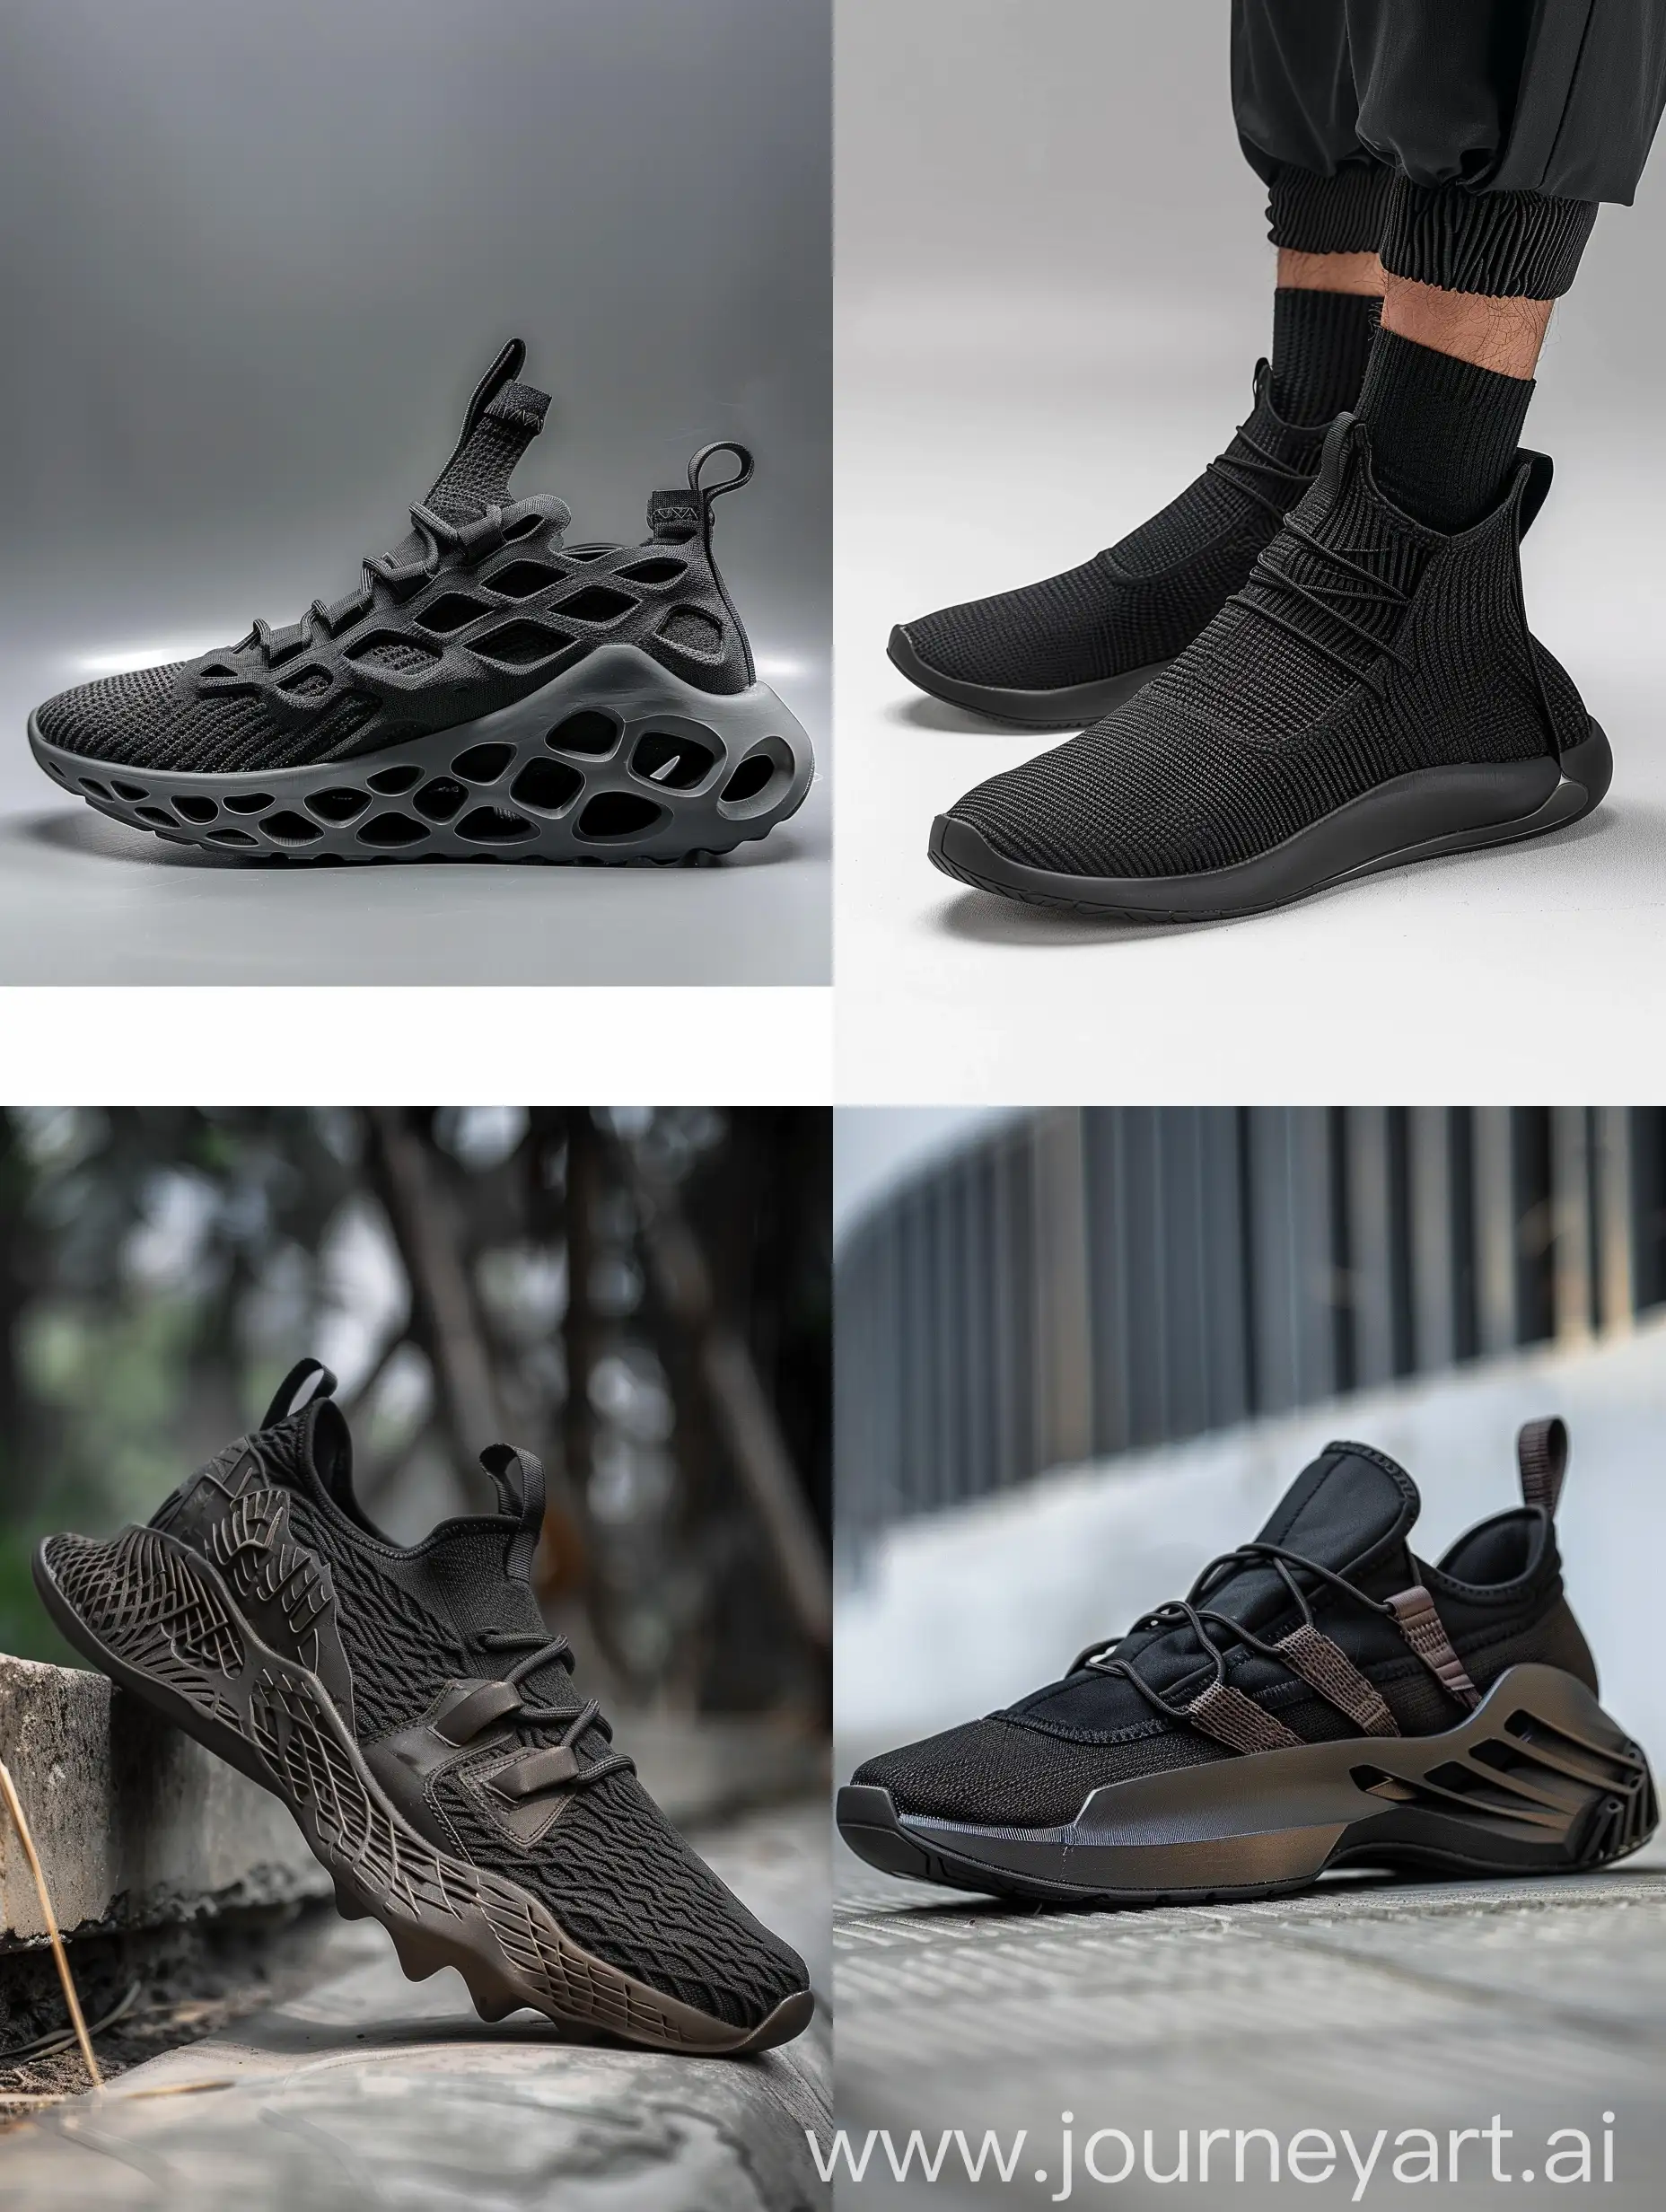 Design sneakers , no laces , ancient Egypt inspiration , 3d printed , color black , can add intire socks to it , futuristic design , breathable , chunky